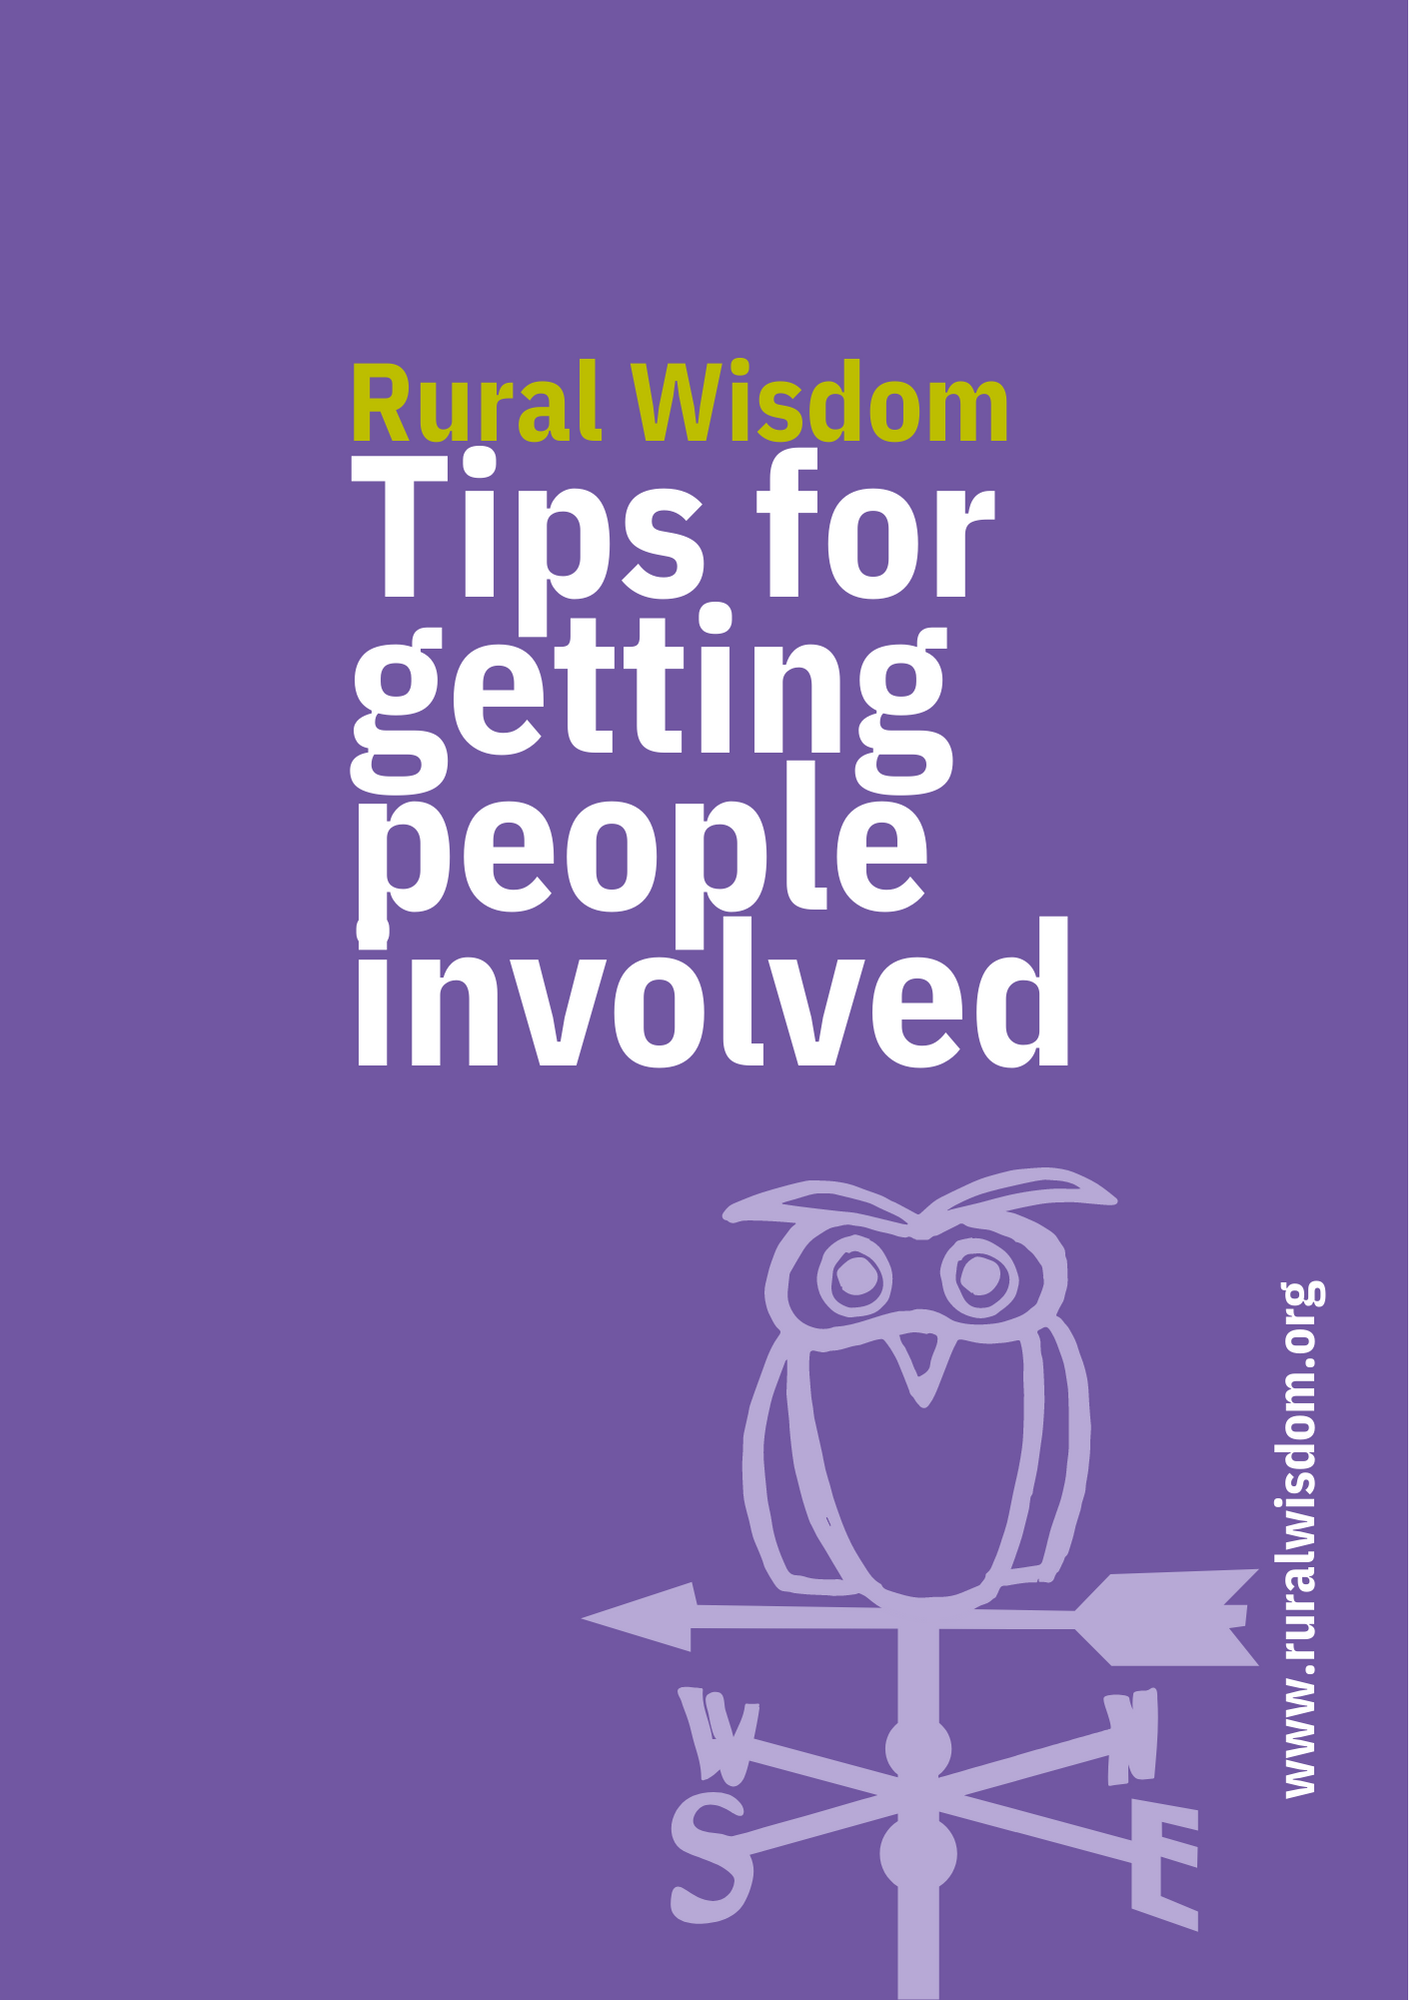 Rural Wisdom tips for getting people involved